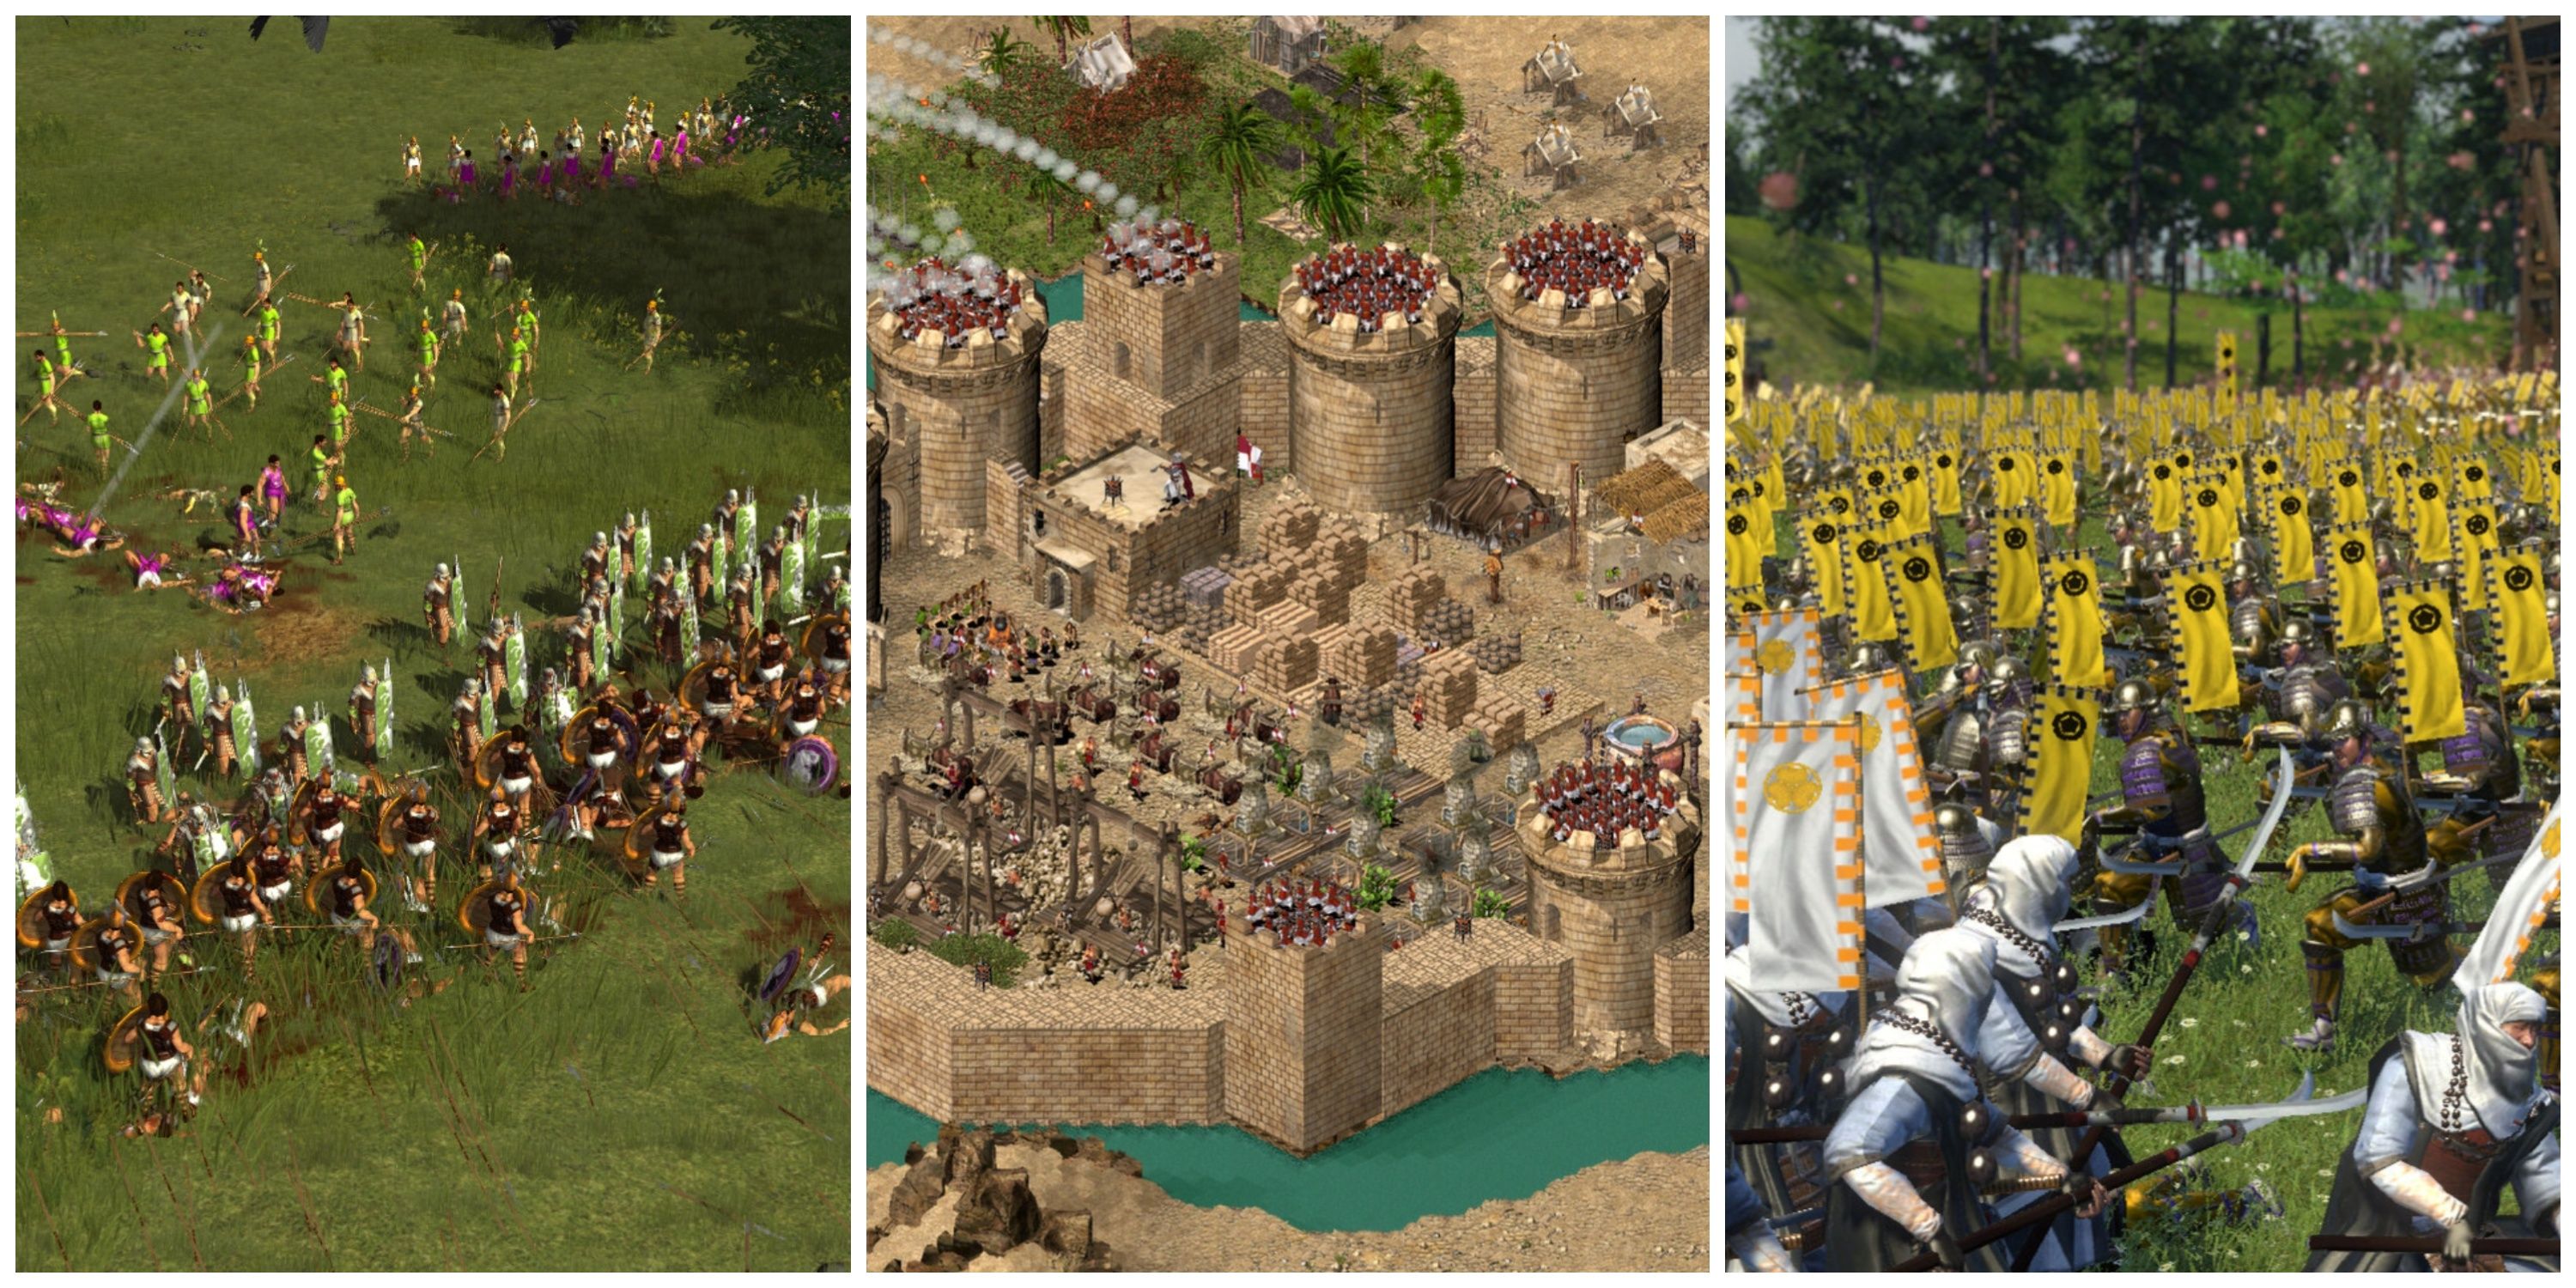 Best Historical RTS Games, Ranked (Featured Image) - Hegemony 3 + Stronghold Crusader + Total War: Shogun 2